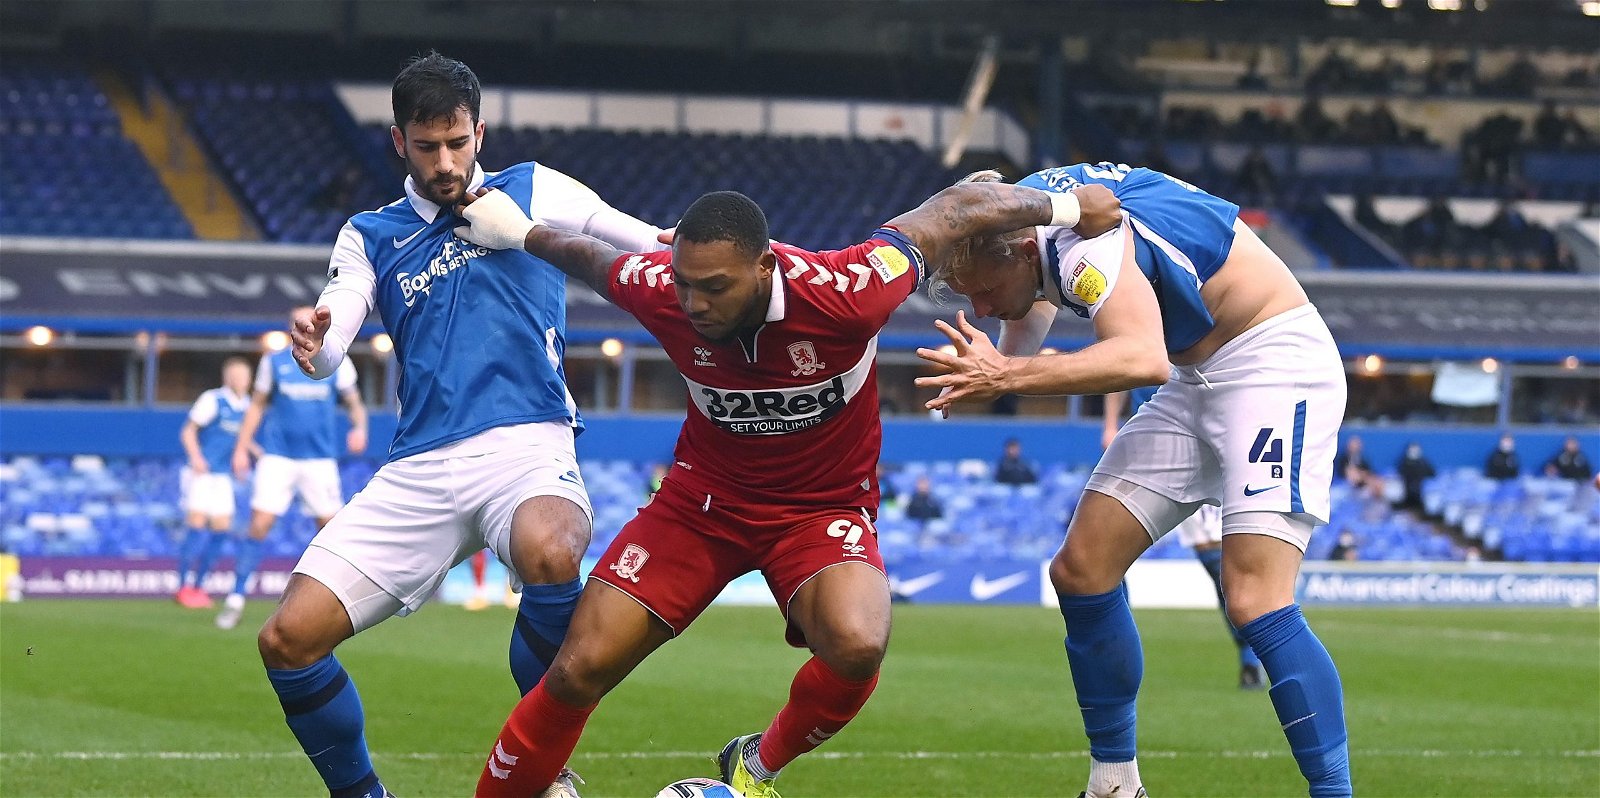 , Neil Warnock reveals why Middlesbrough striker was left out v Millwall despite being fit